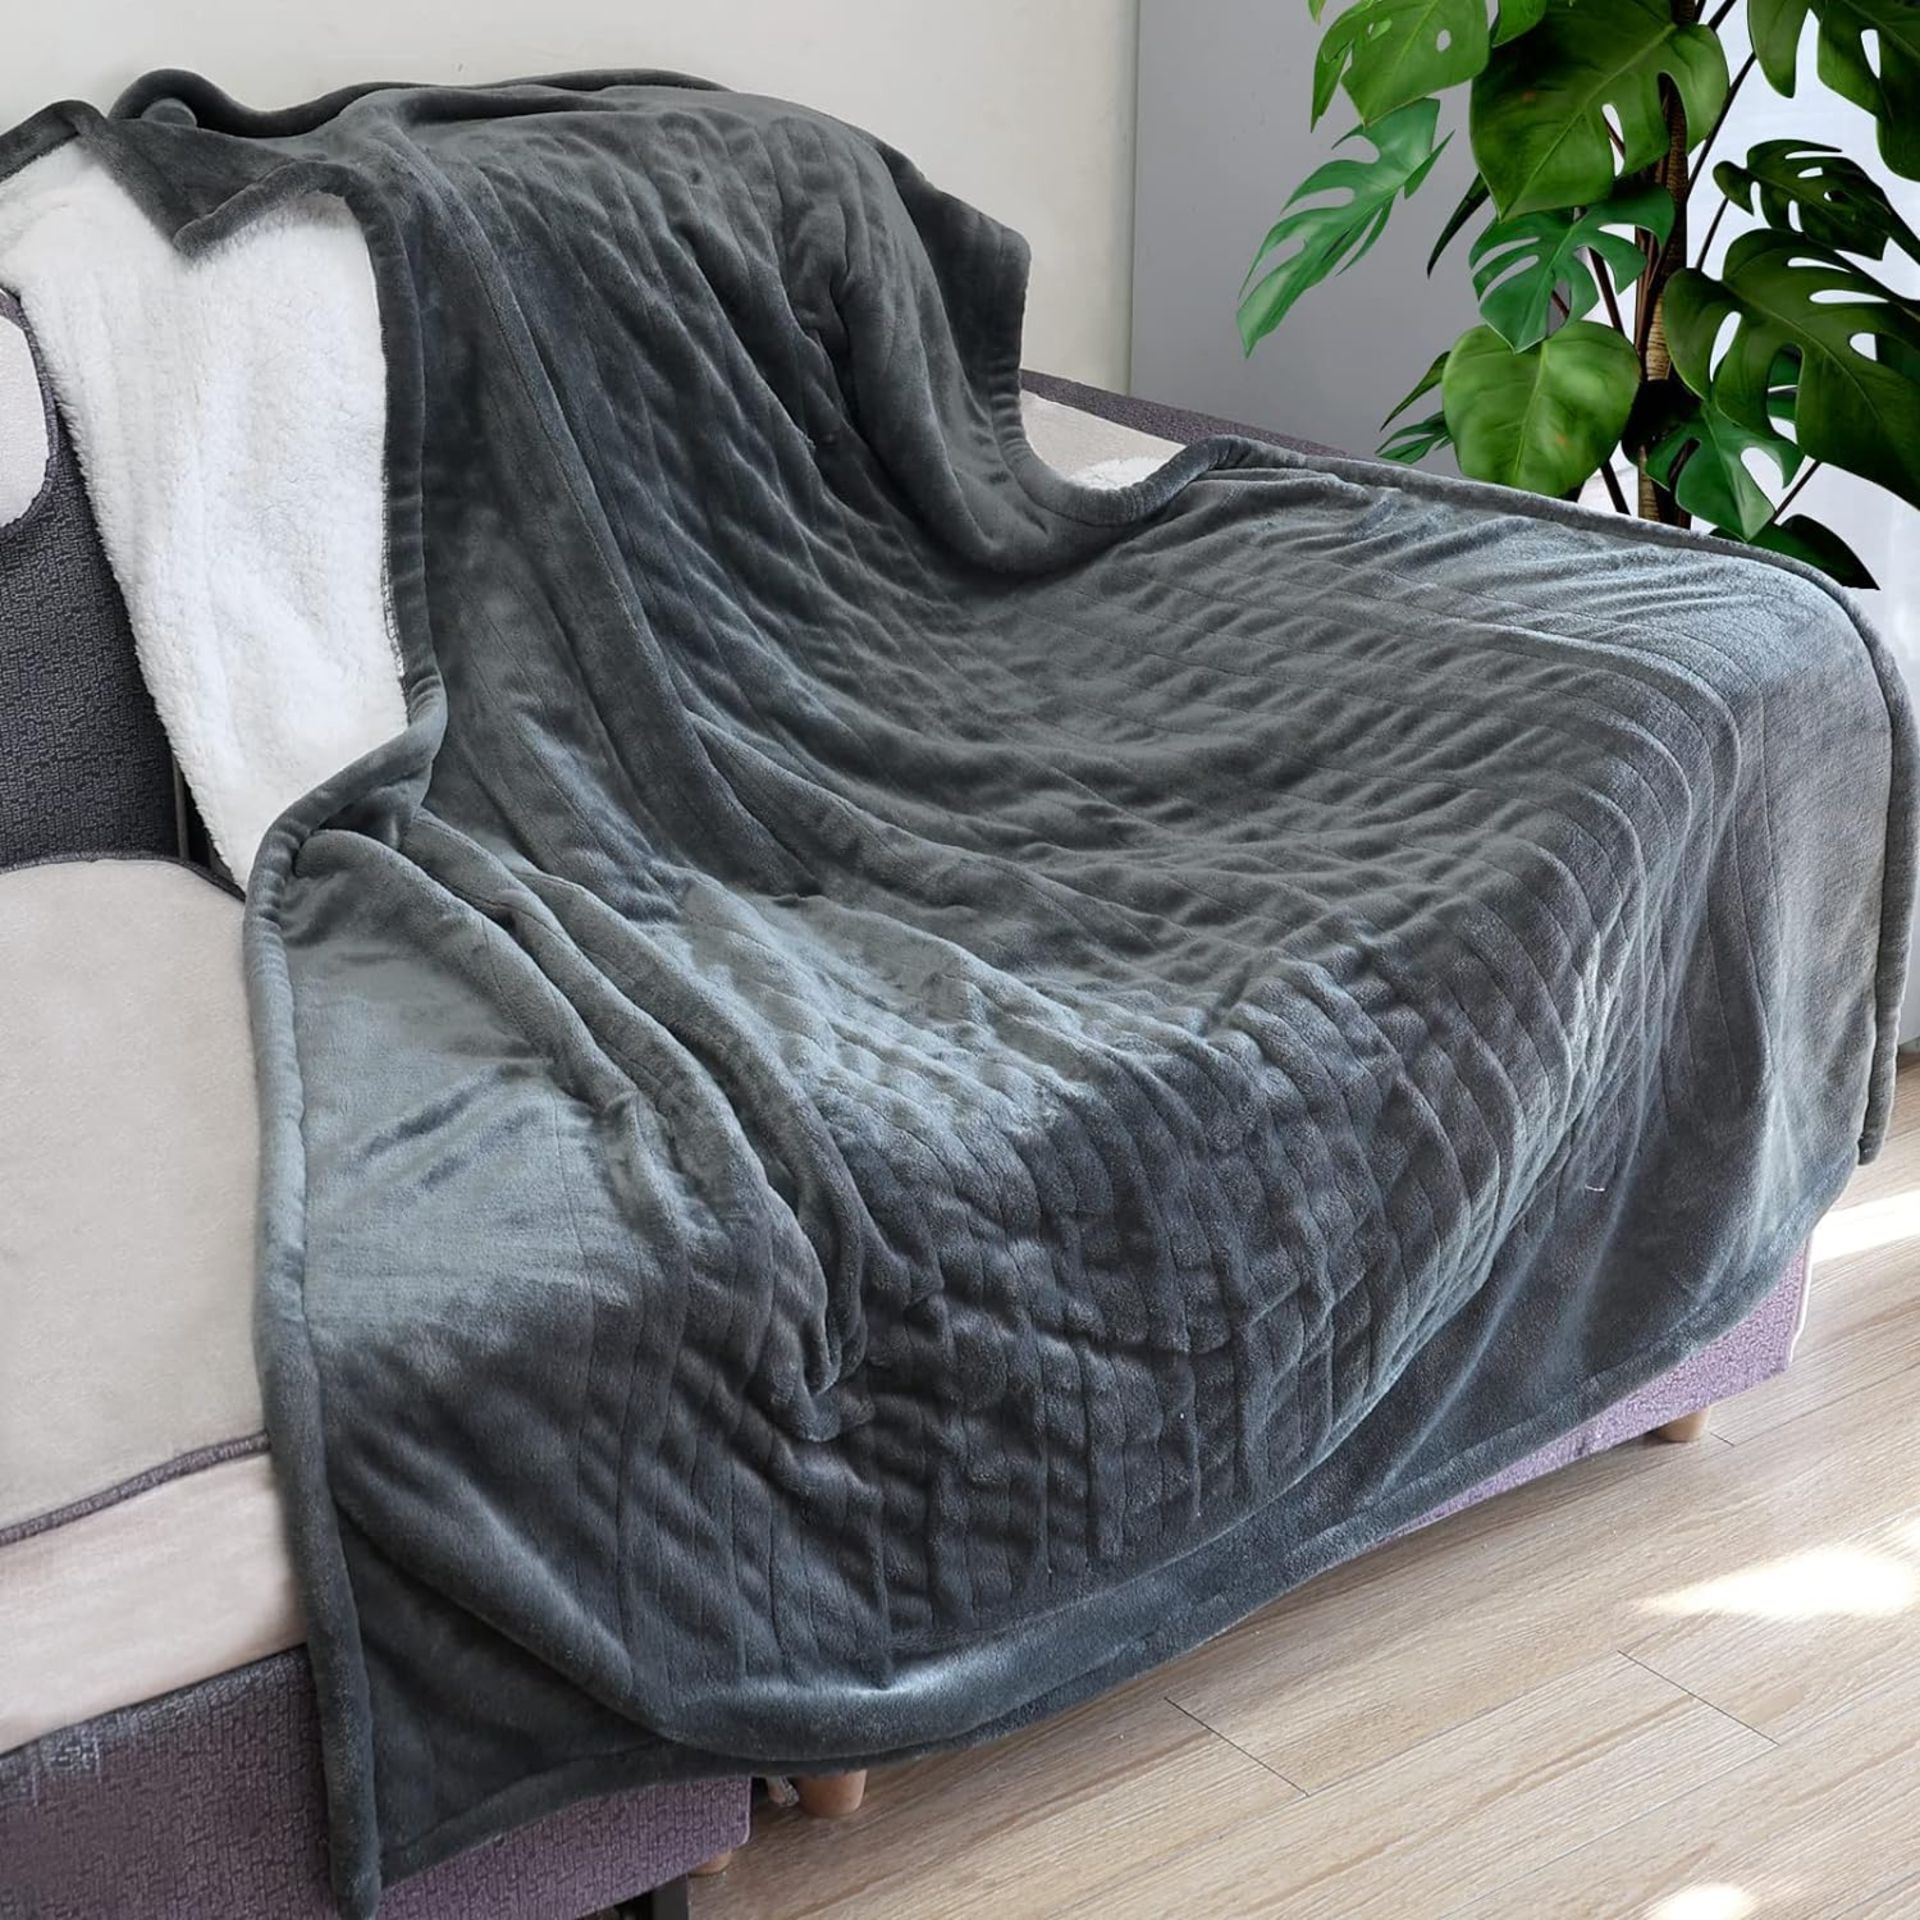 RRP £49.99 nuosife Electric Blanket Heated Throw with 10 Heat Settings & 12 Hour Auto Off Timer -